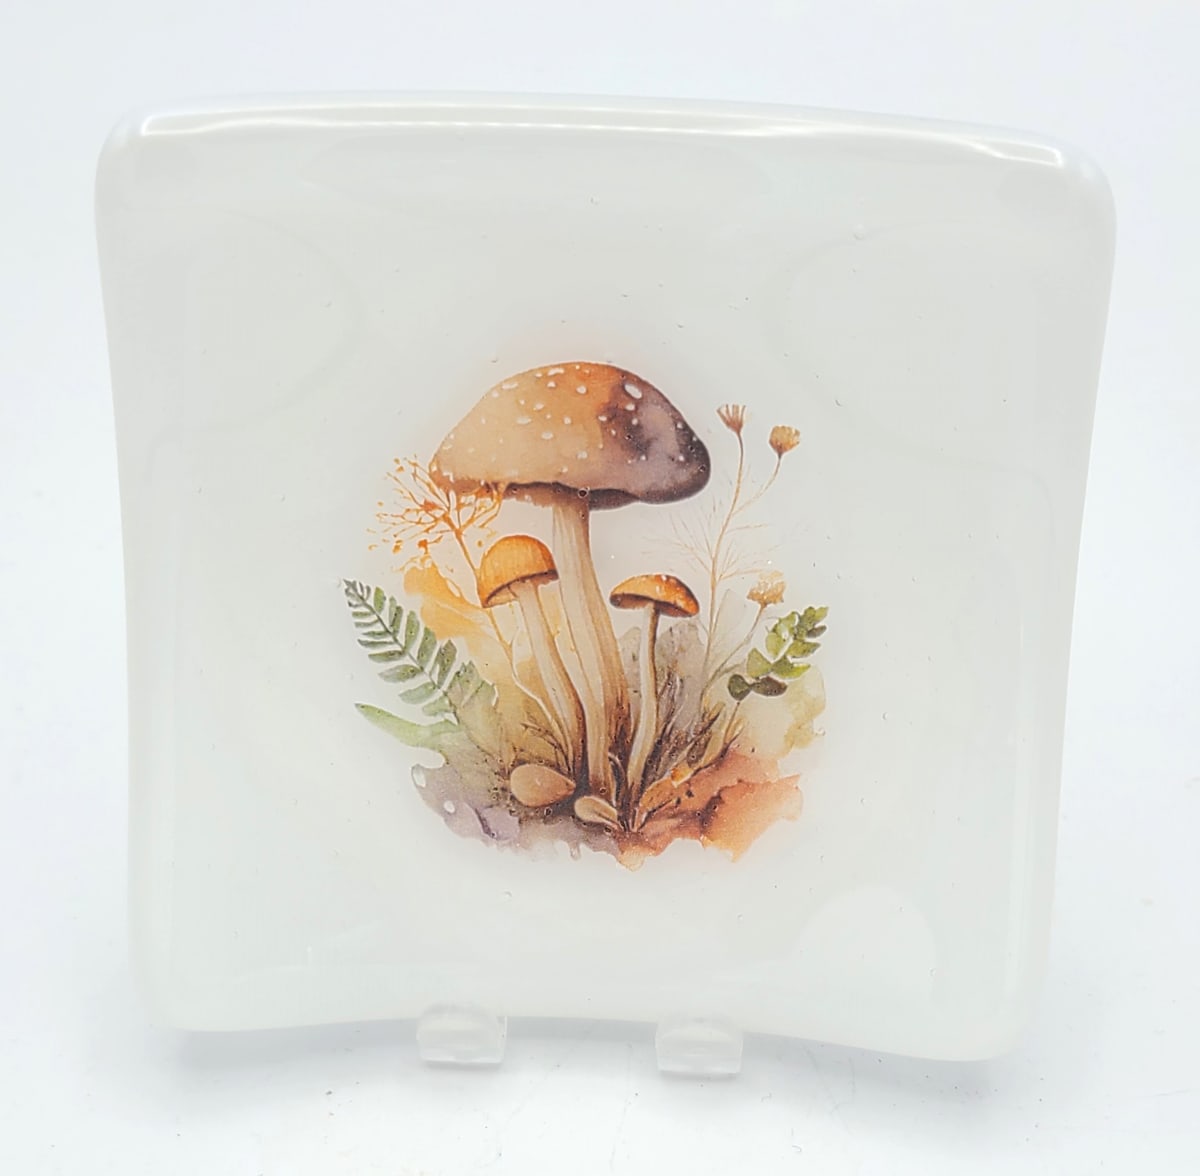 Small Plate with Mushrooms on White by Kathy Kollenburn 